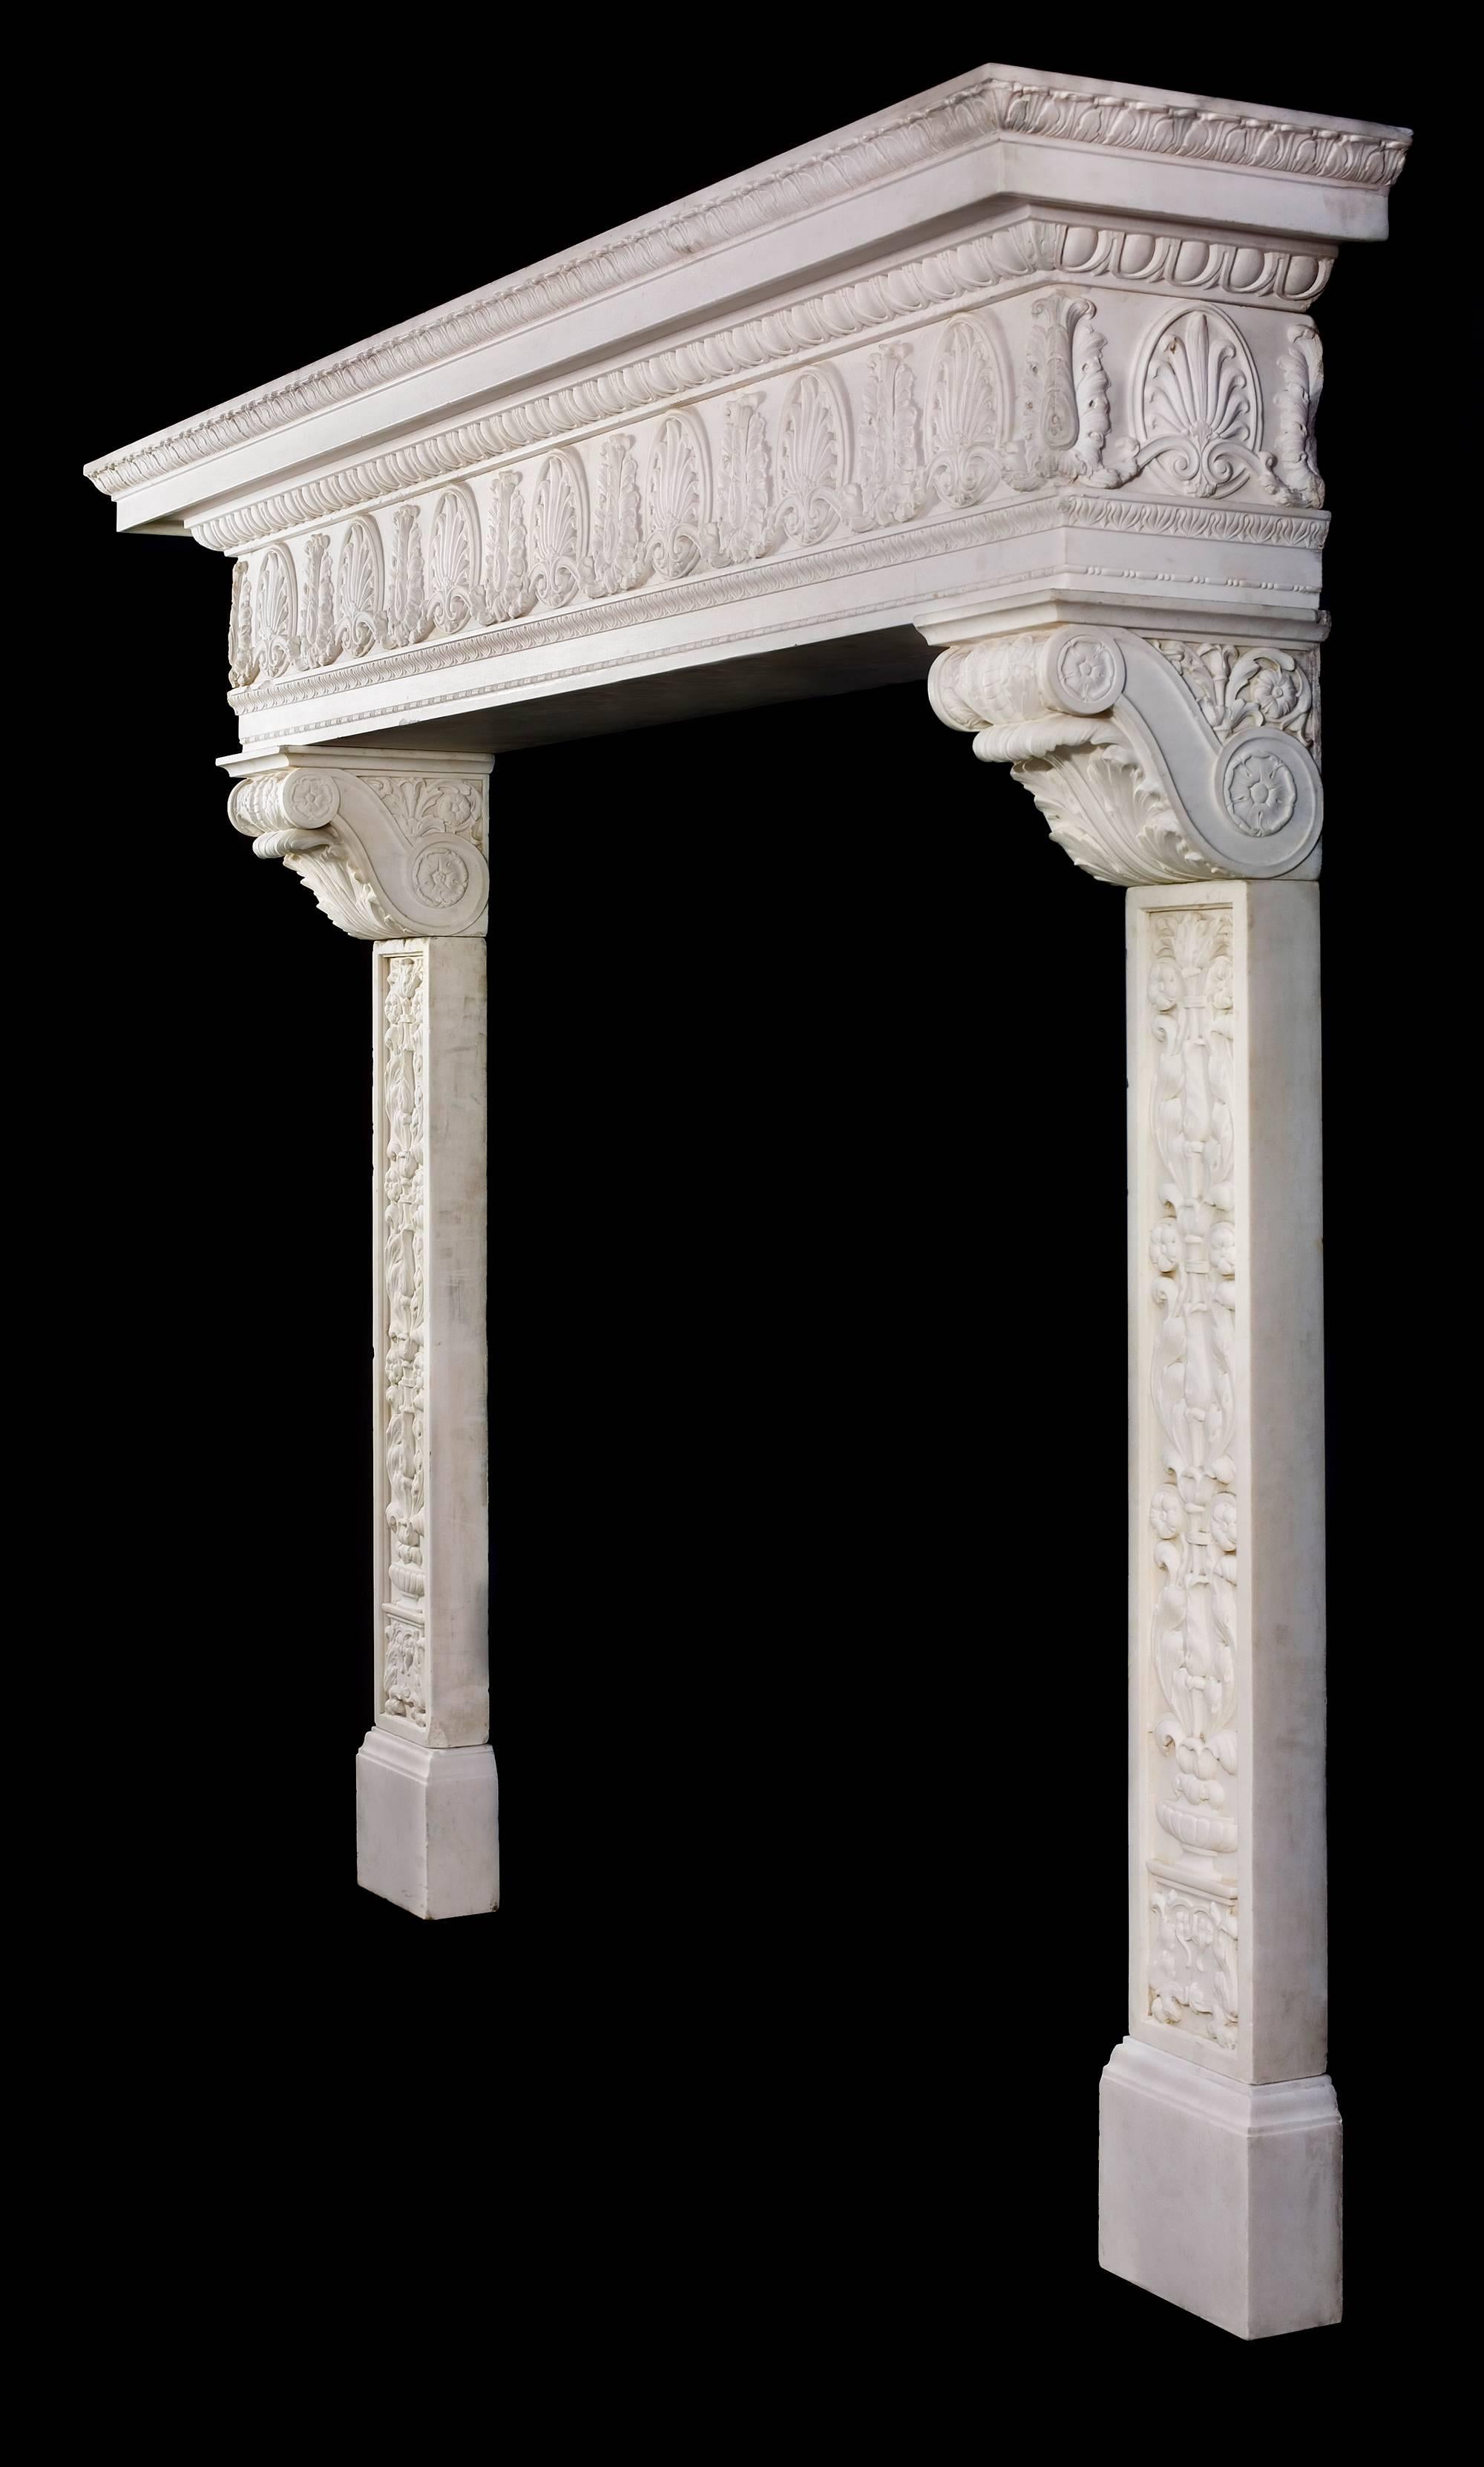 A grand Italian Renaissance style antique fireplace mantel in white Statuary marble. The stepped shelf, edged with richly carved lambs tongue detail over an egg and dart border, sits above a very fine frieze, made from one block and carved in high